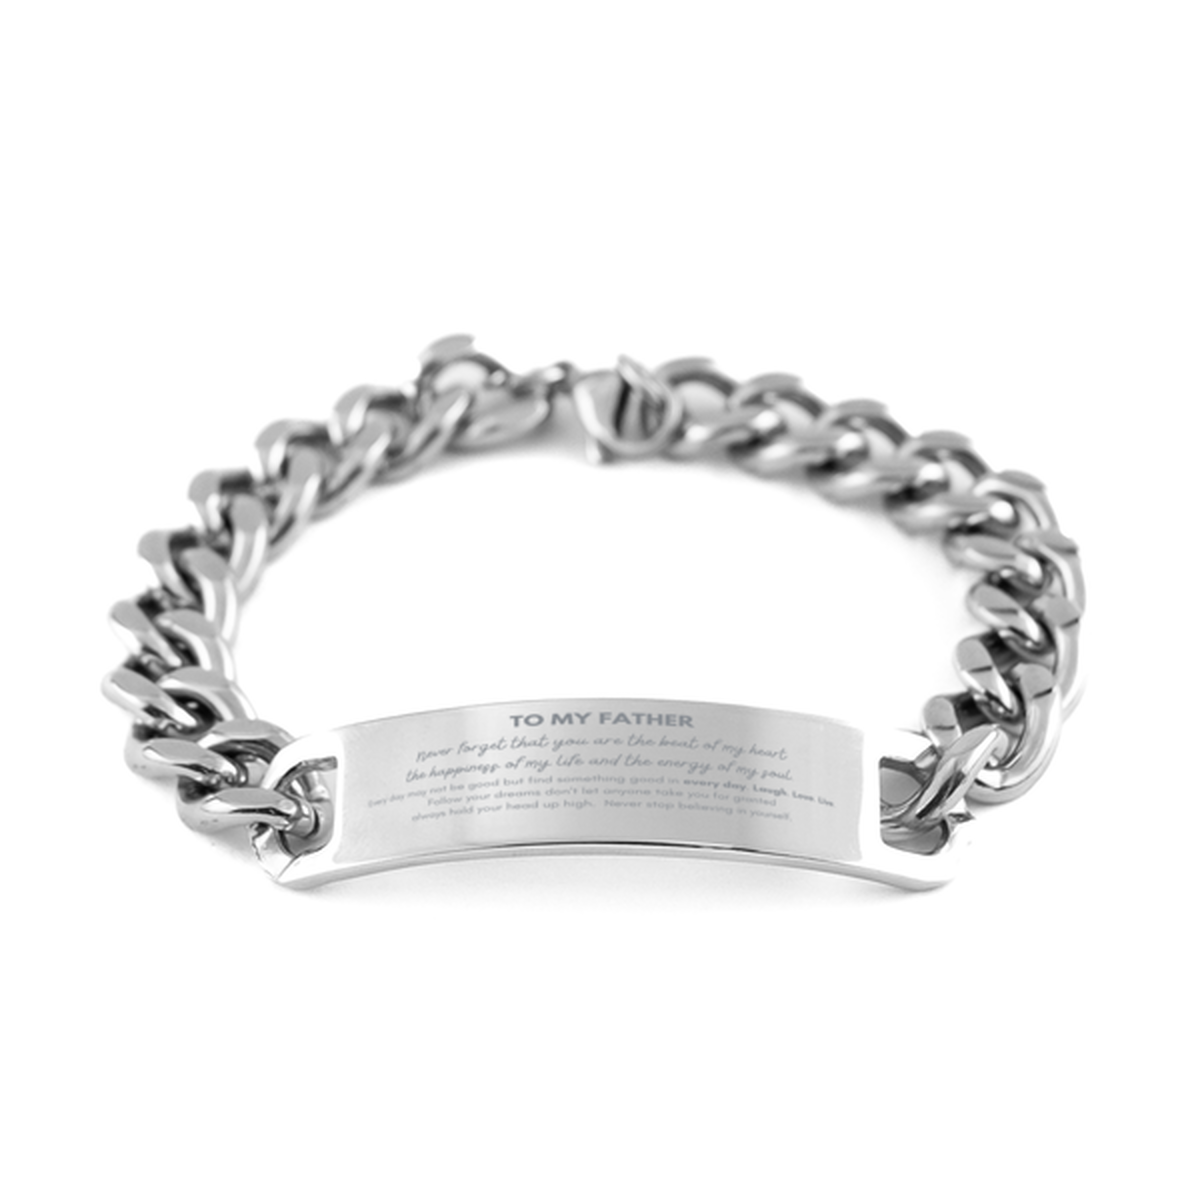 To My Father Bracelet Gifts, Christmas Father Cuban Chain Stainless Steel Bracelet Present, Birthday Unique Motivational For Father, To My Father Never forget that you are the beat of my heart the happiness of my life and the energy of my soul